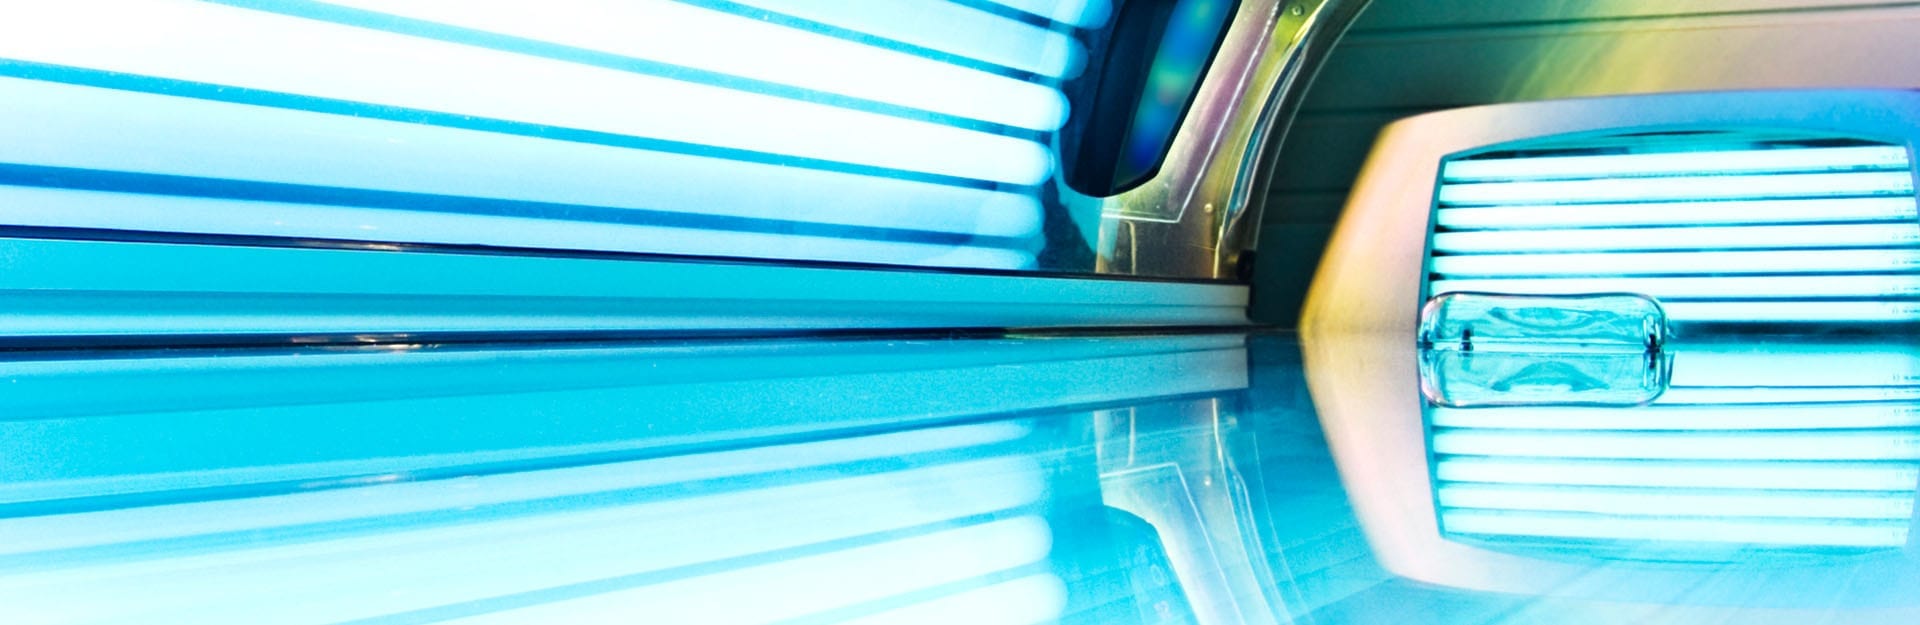 inside of tanning bed at modern gym